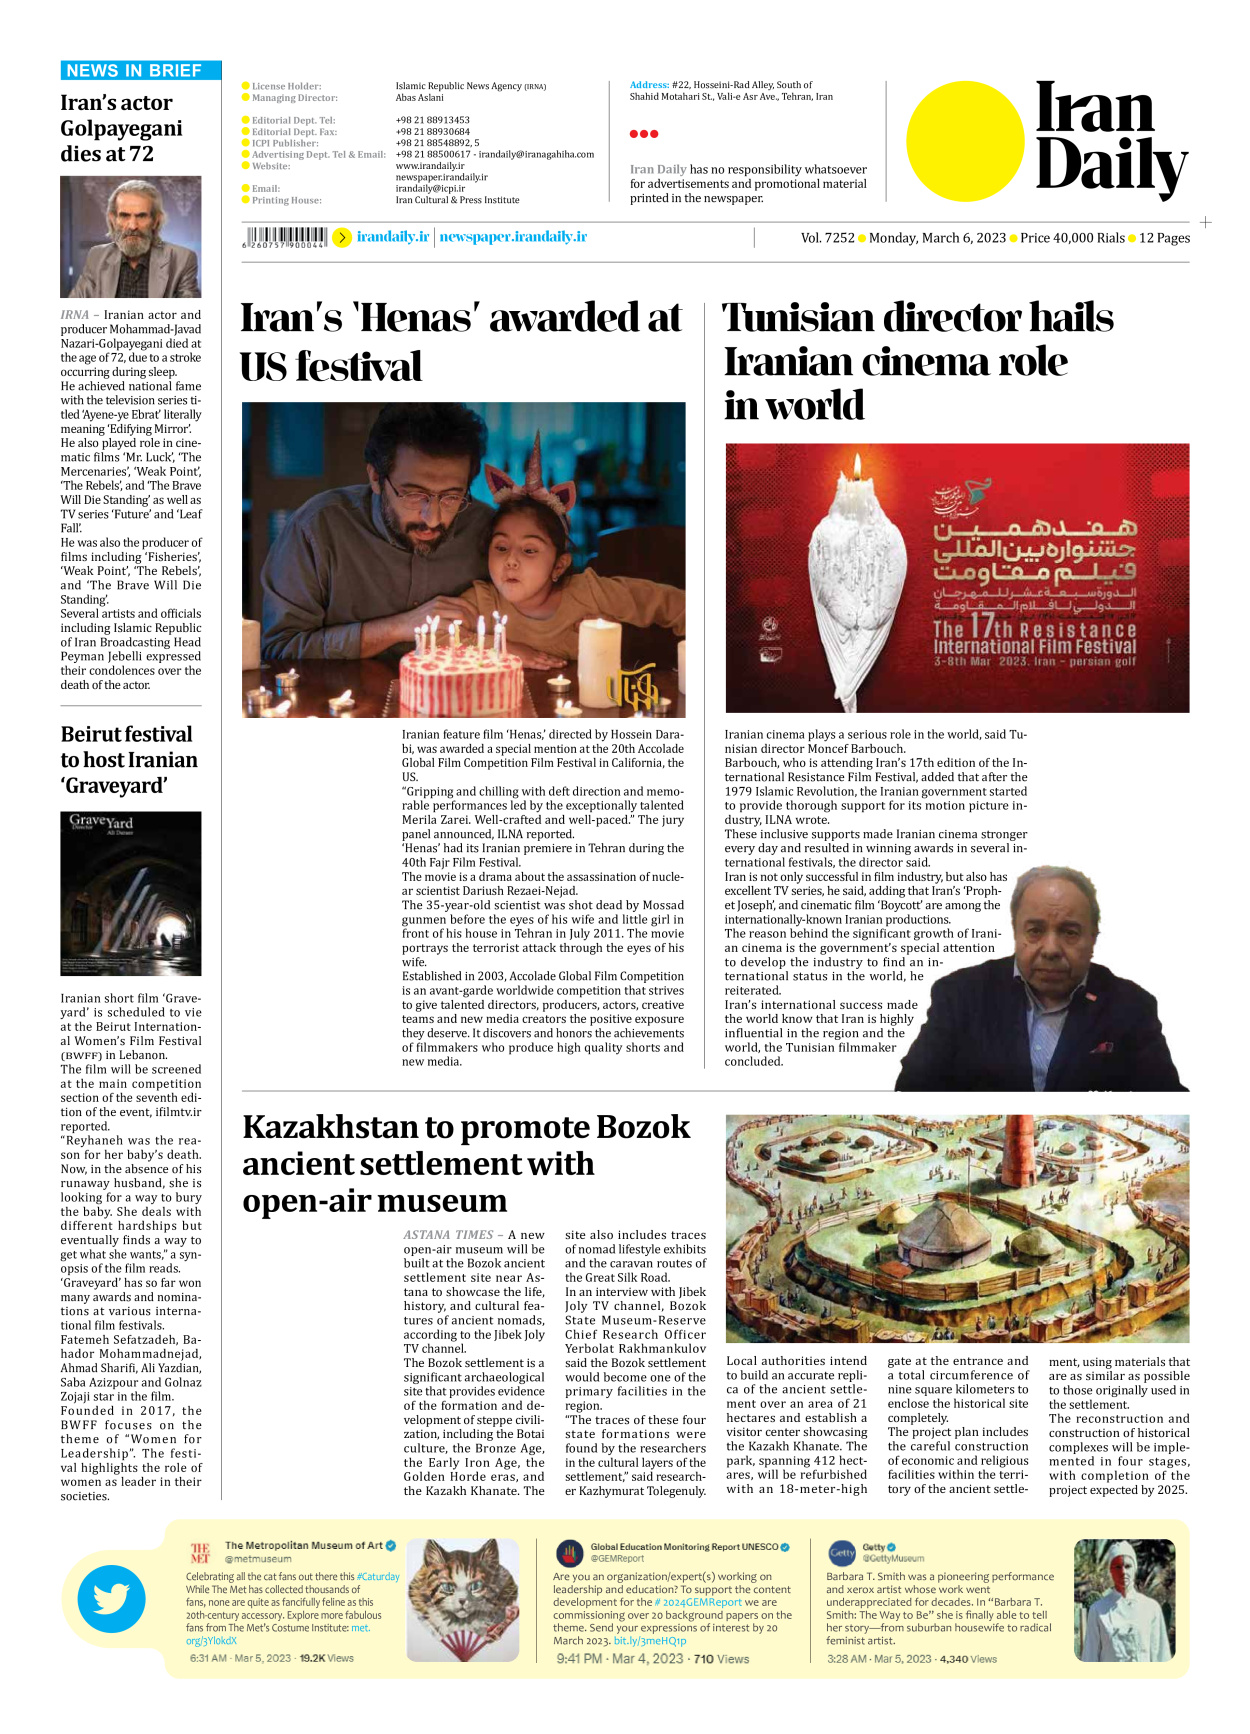 Iran Daily - Number Seven Thousand Two Hundred and Fifty Two - 06 March 2023 - Page 12